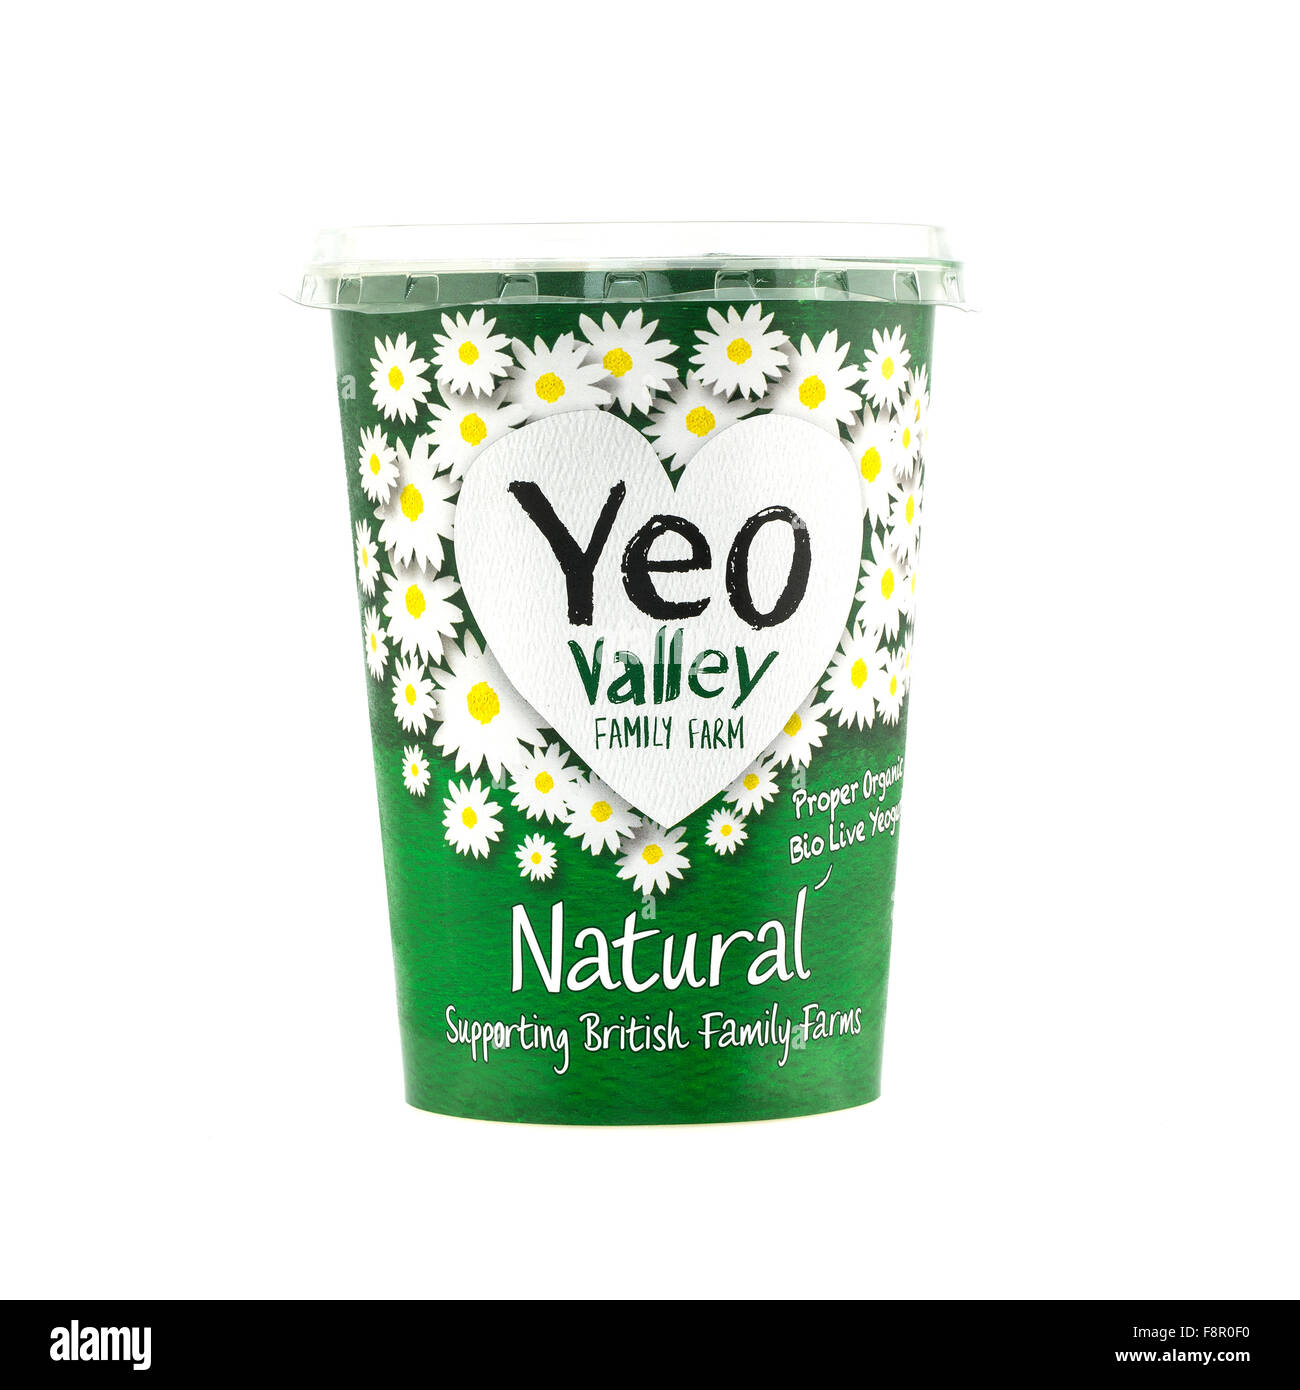 Yeo Valley Natural Yogurt on a White Background Stock Photo